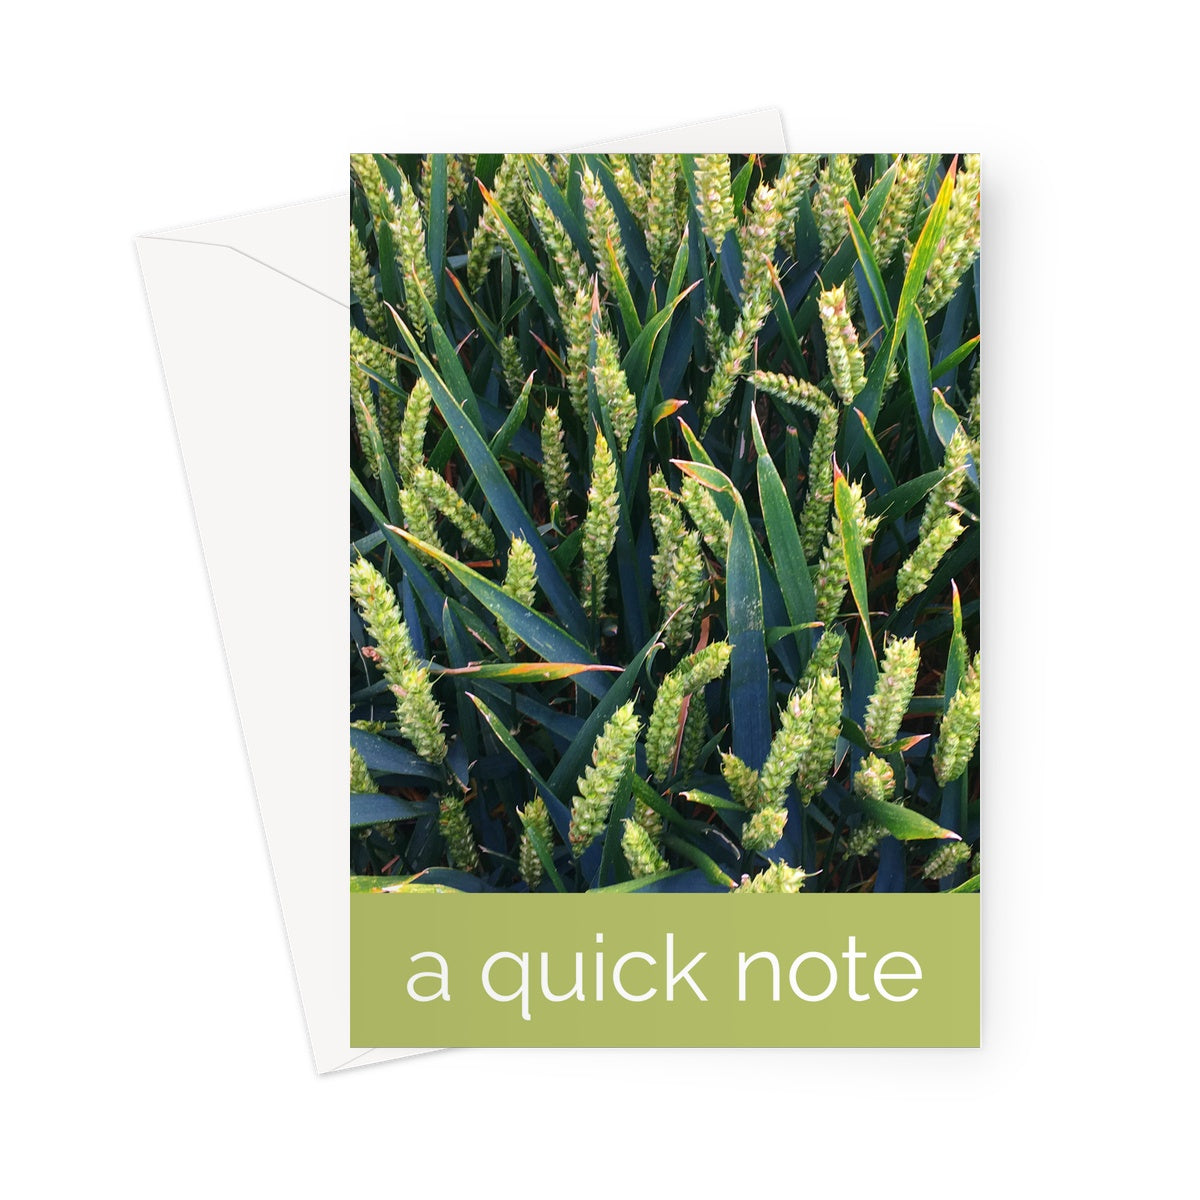 A closeup of a field of wheat in summer in this lovely photo greeting card or notecard.  A light green coloured strip at the bottom of the card denotes the words "a quick note"